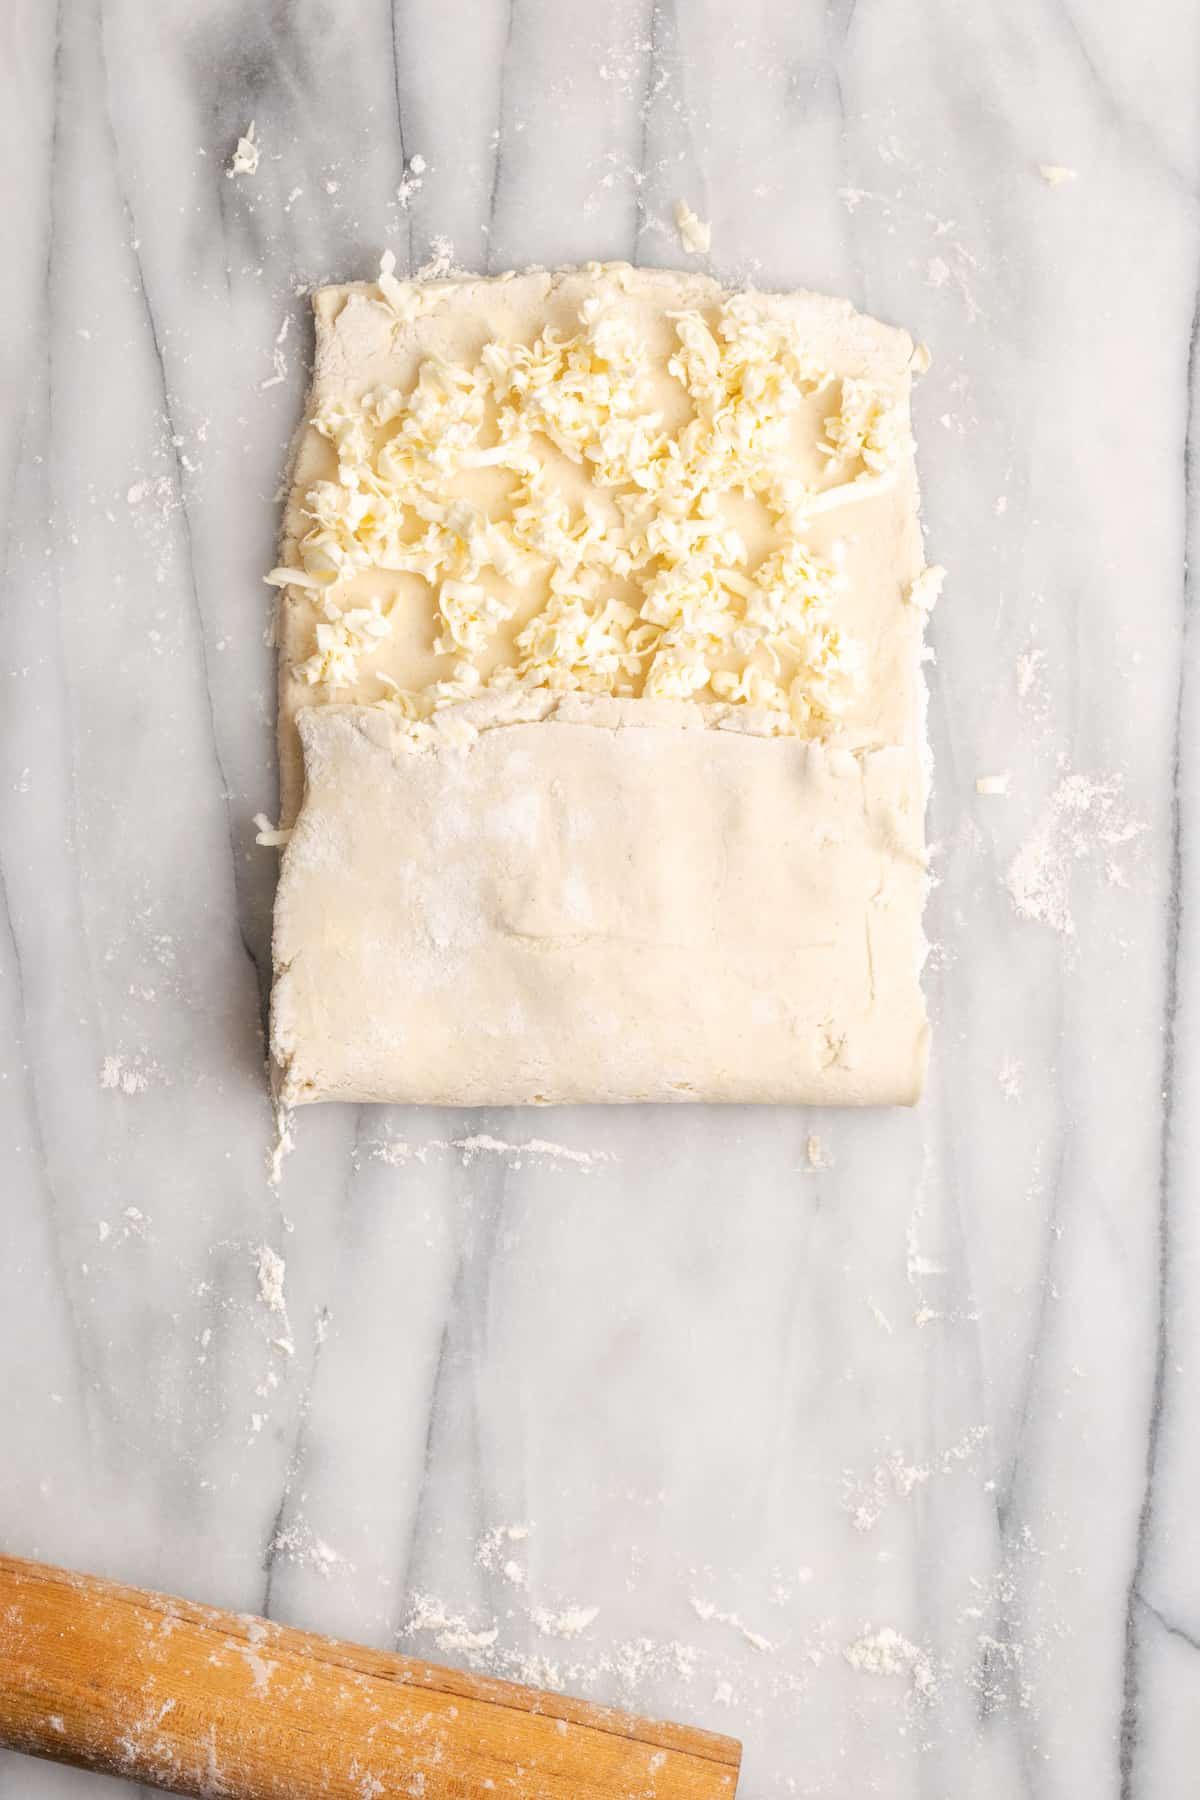 A rectangle of dough with shredded butter on top, with a third of the dough folded up